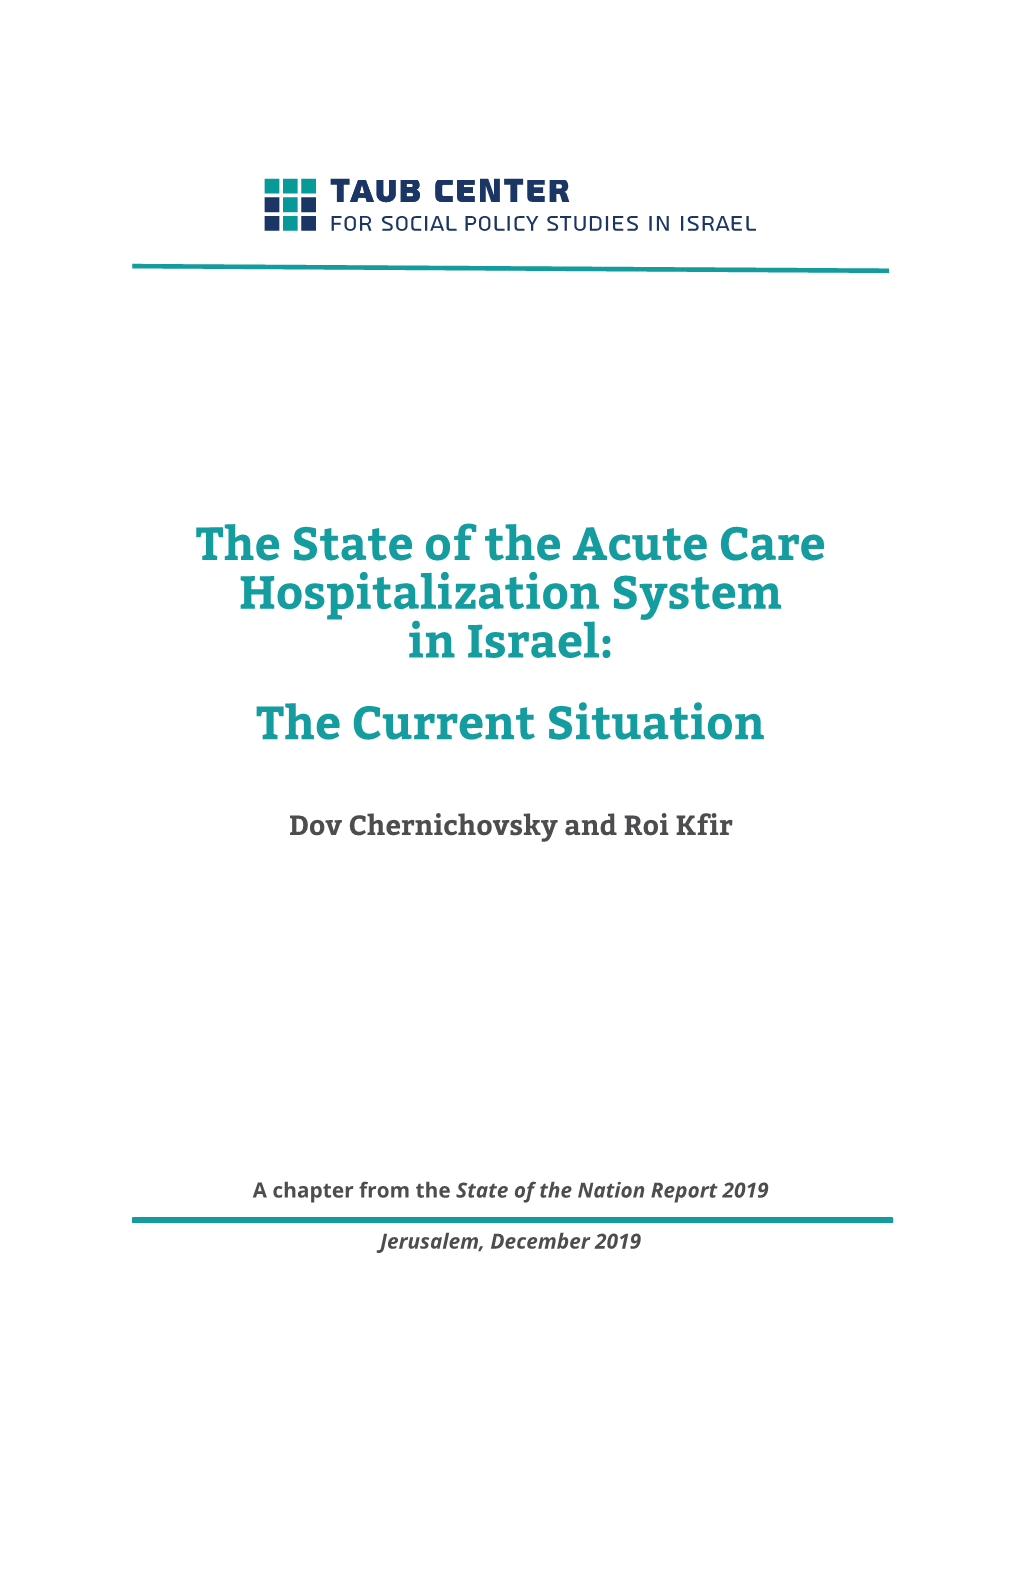 The State of the Acute Care Hospitalization System in Israel: the Current Situation